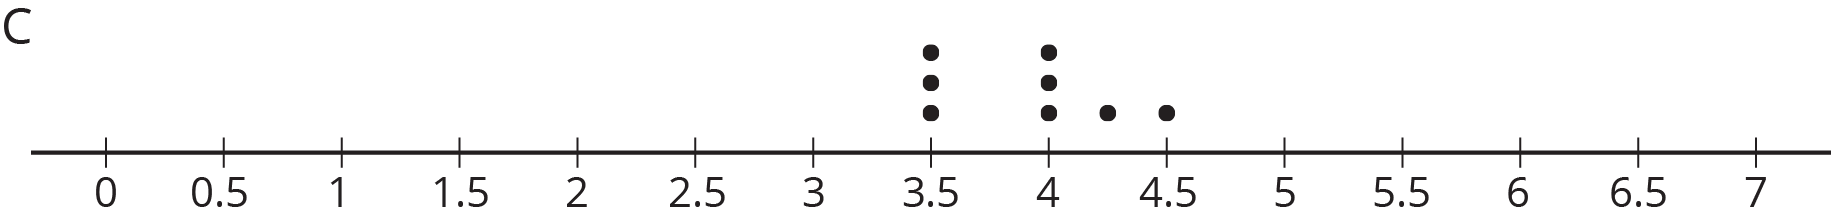 A dot plot labeled “C.” The numbers 0 through 7, in increments of 0 point 5, are indicated. The data are as follows:  3 point 5, 3 dots. 4, 3 dots. 4 point 25, 1 dot. 4 point 5, 1 dot.